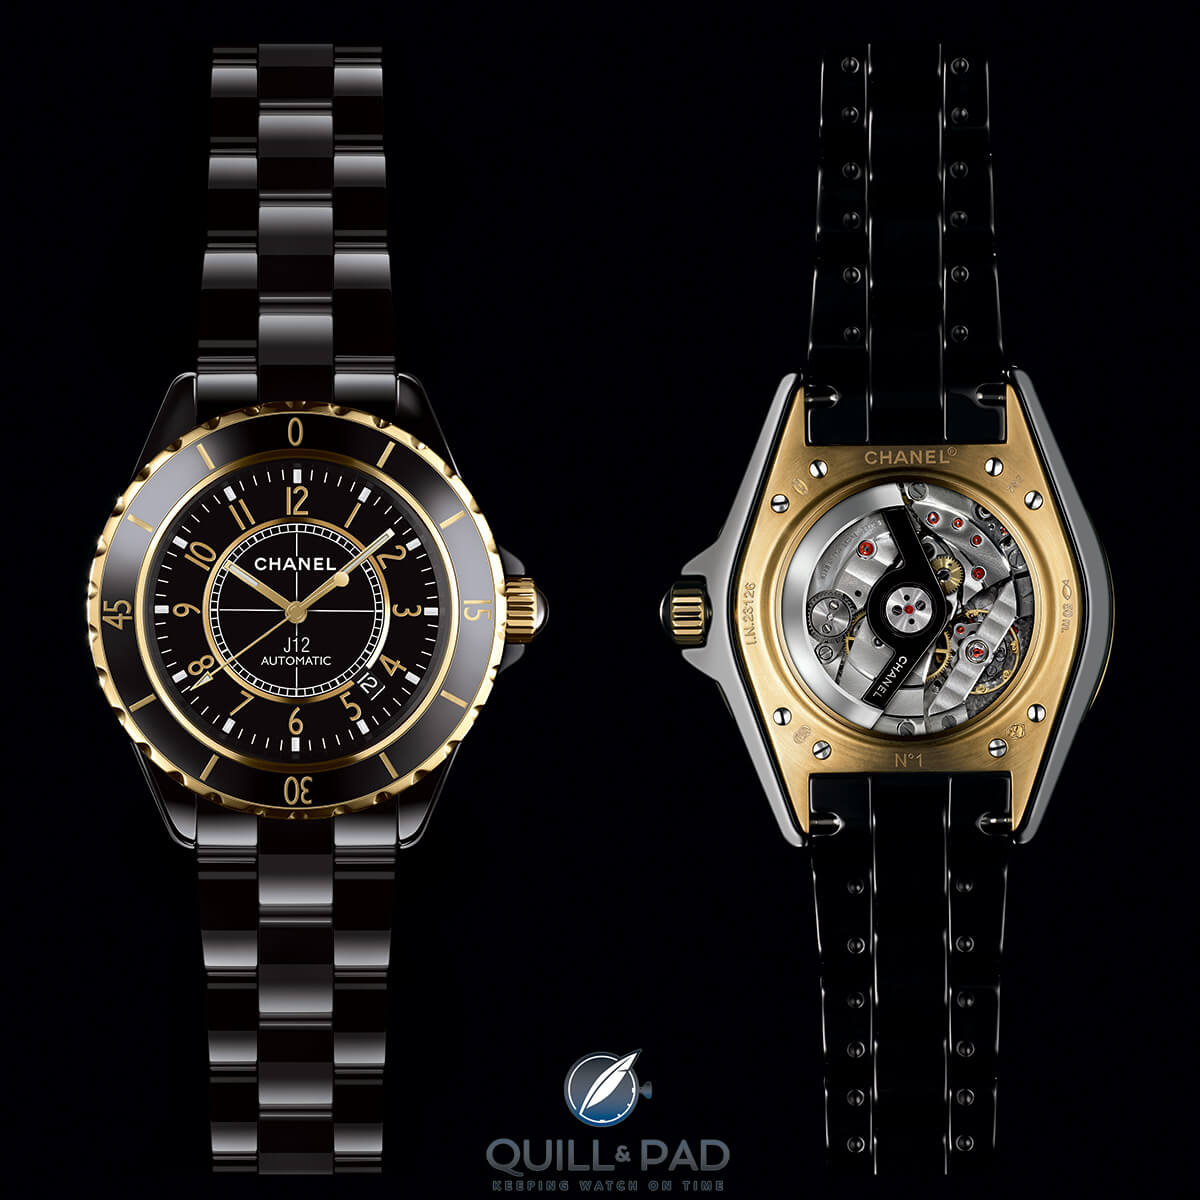 One of the many versions of the Chanel J12, this one outfitted with Audemars Piguet Caliber 3125